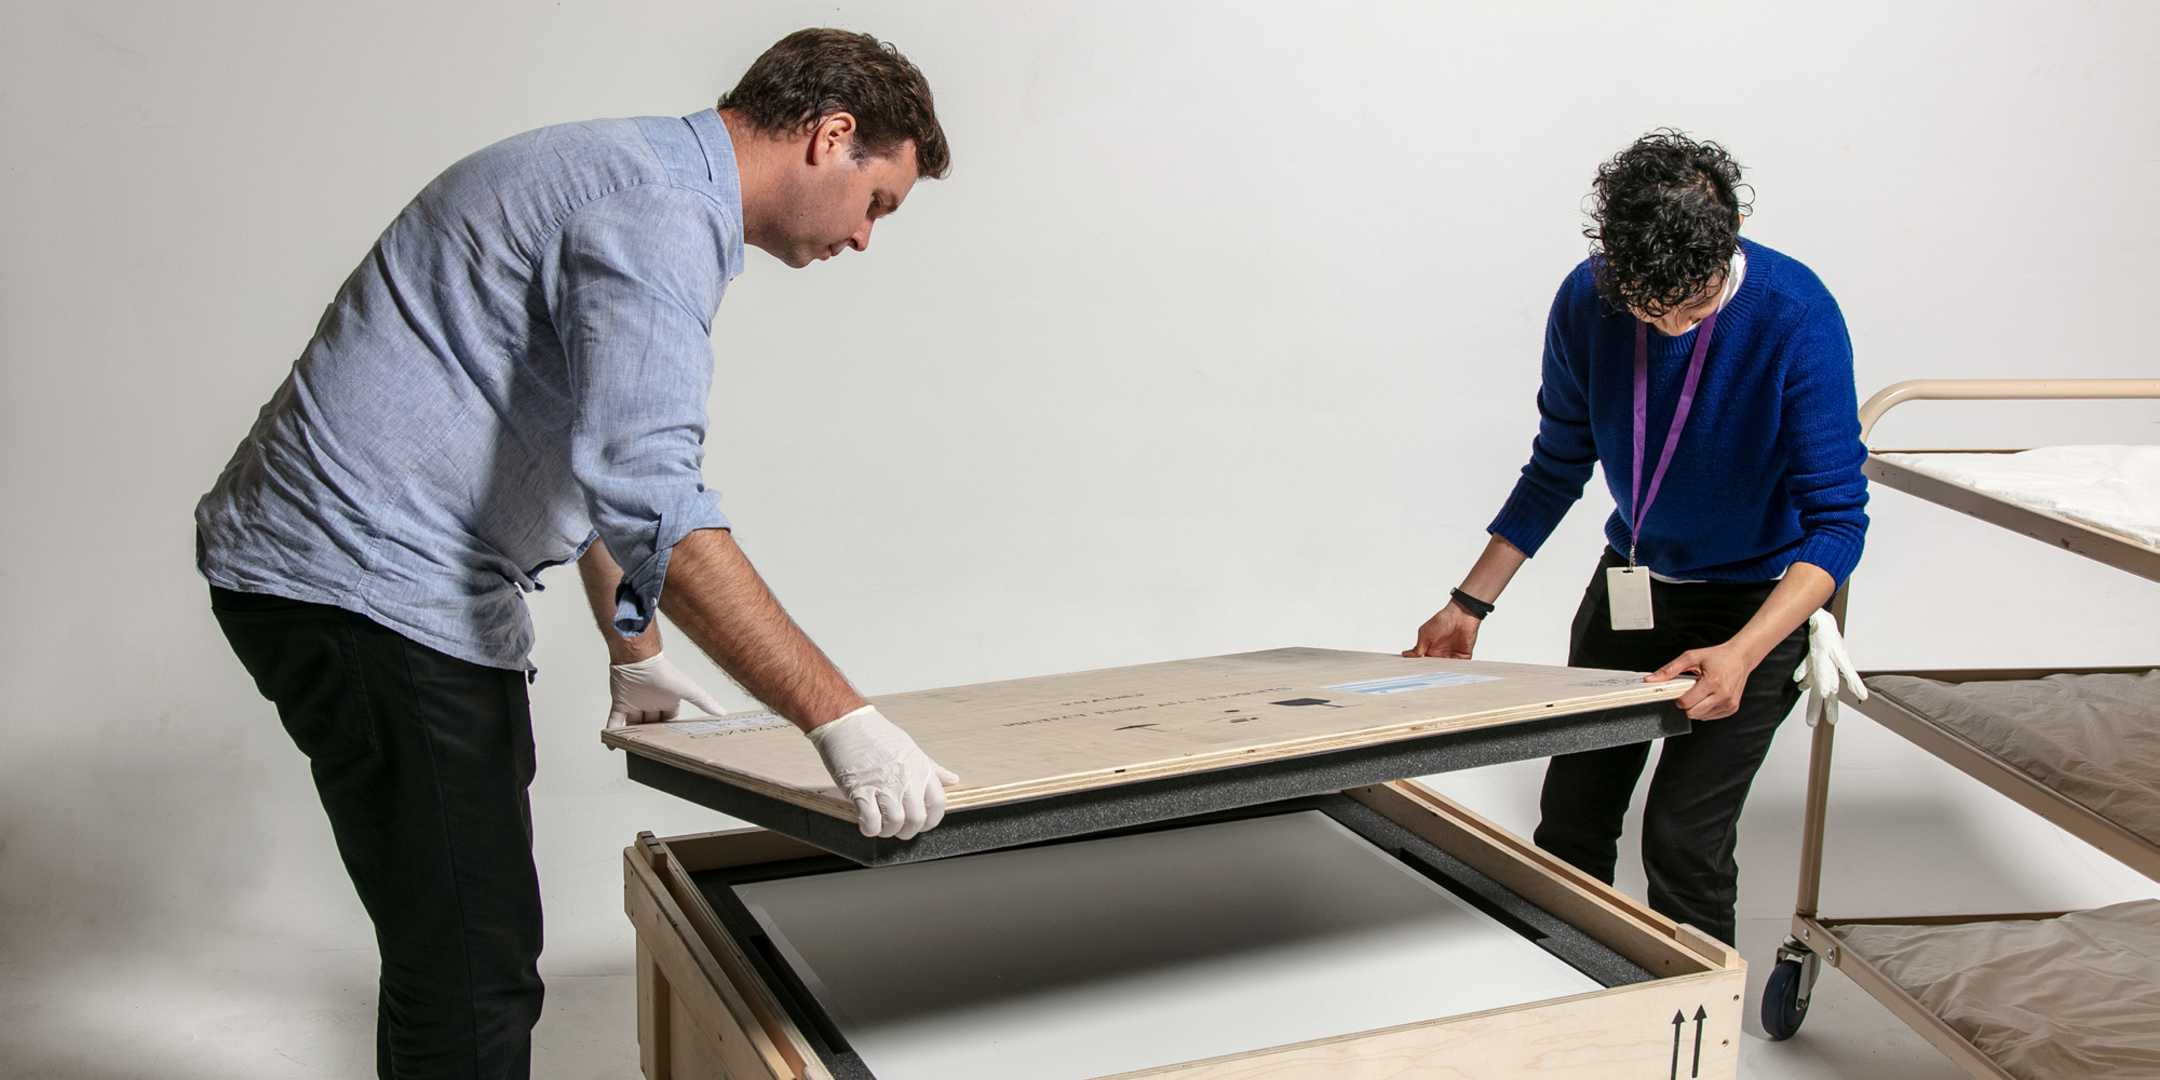 Unpacking objects for the Bligh exhibition. Registrar Anupa Shah and conservator Nick Flood carefully unpack the new acquisitions from their crate upon arrival. 